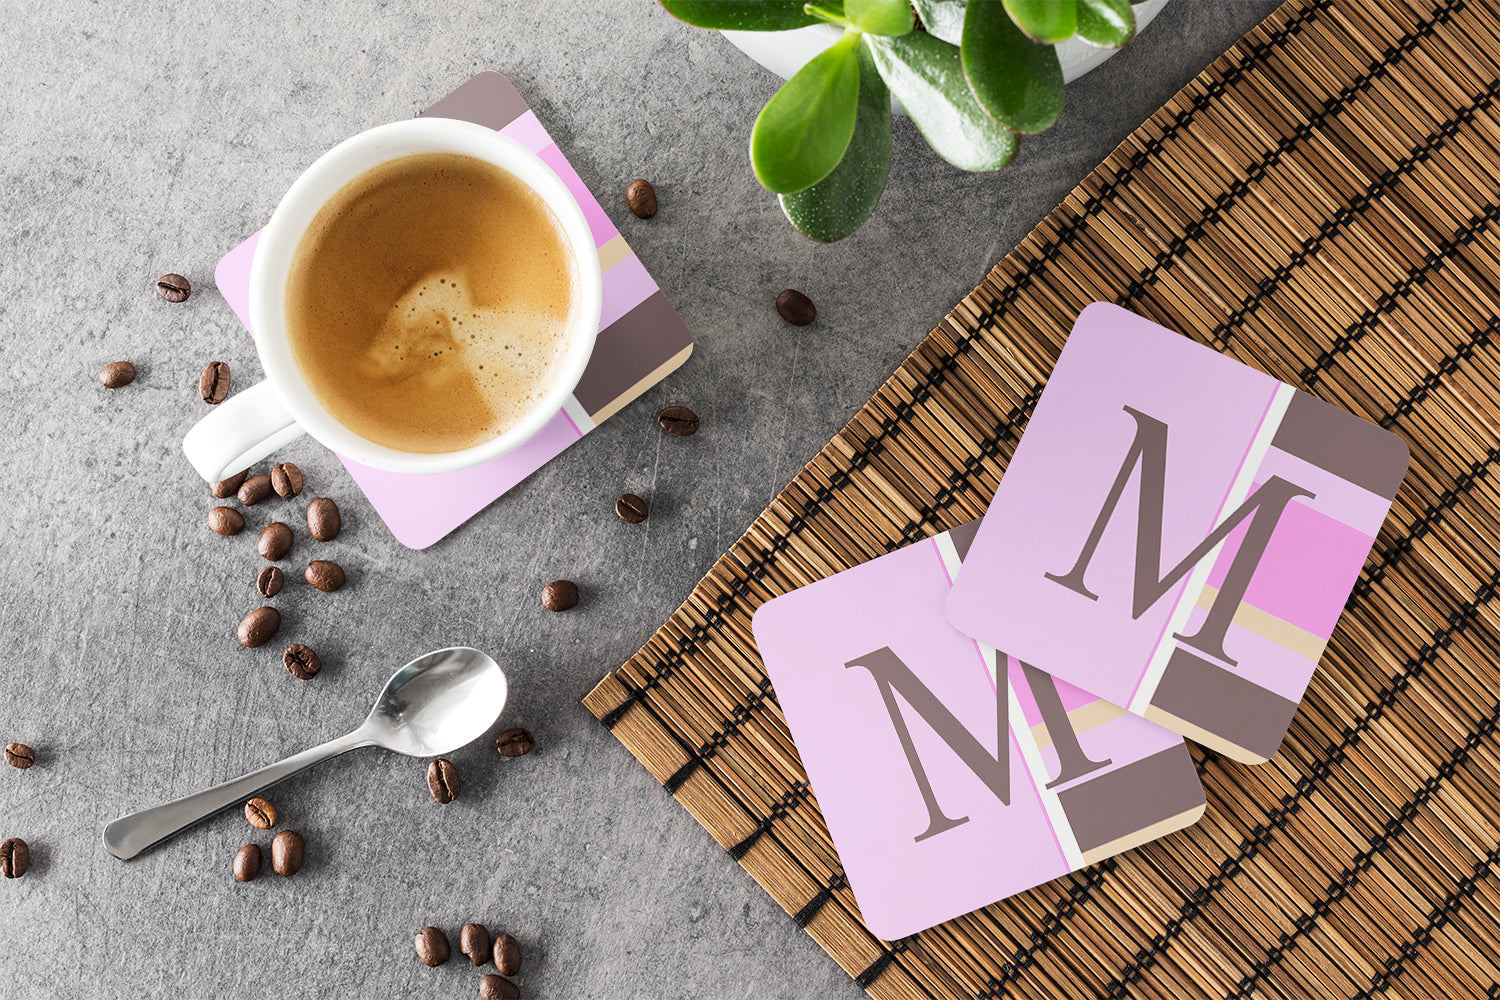 Set of 4 Monogram - Pink Stripes Foam Coasters Initial Letter M - the-store.com